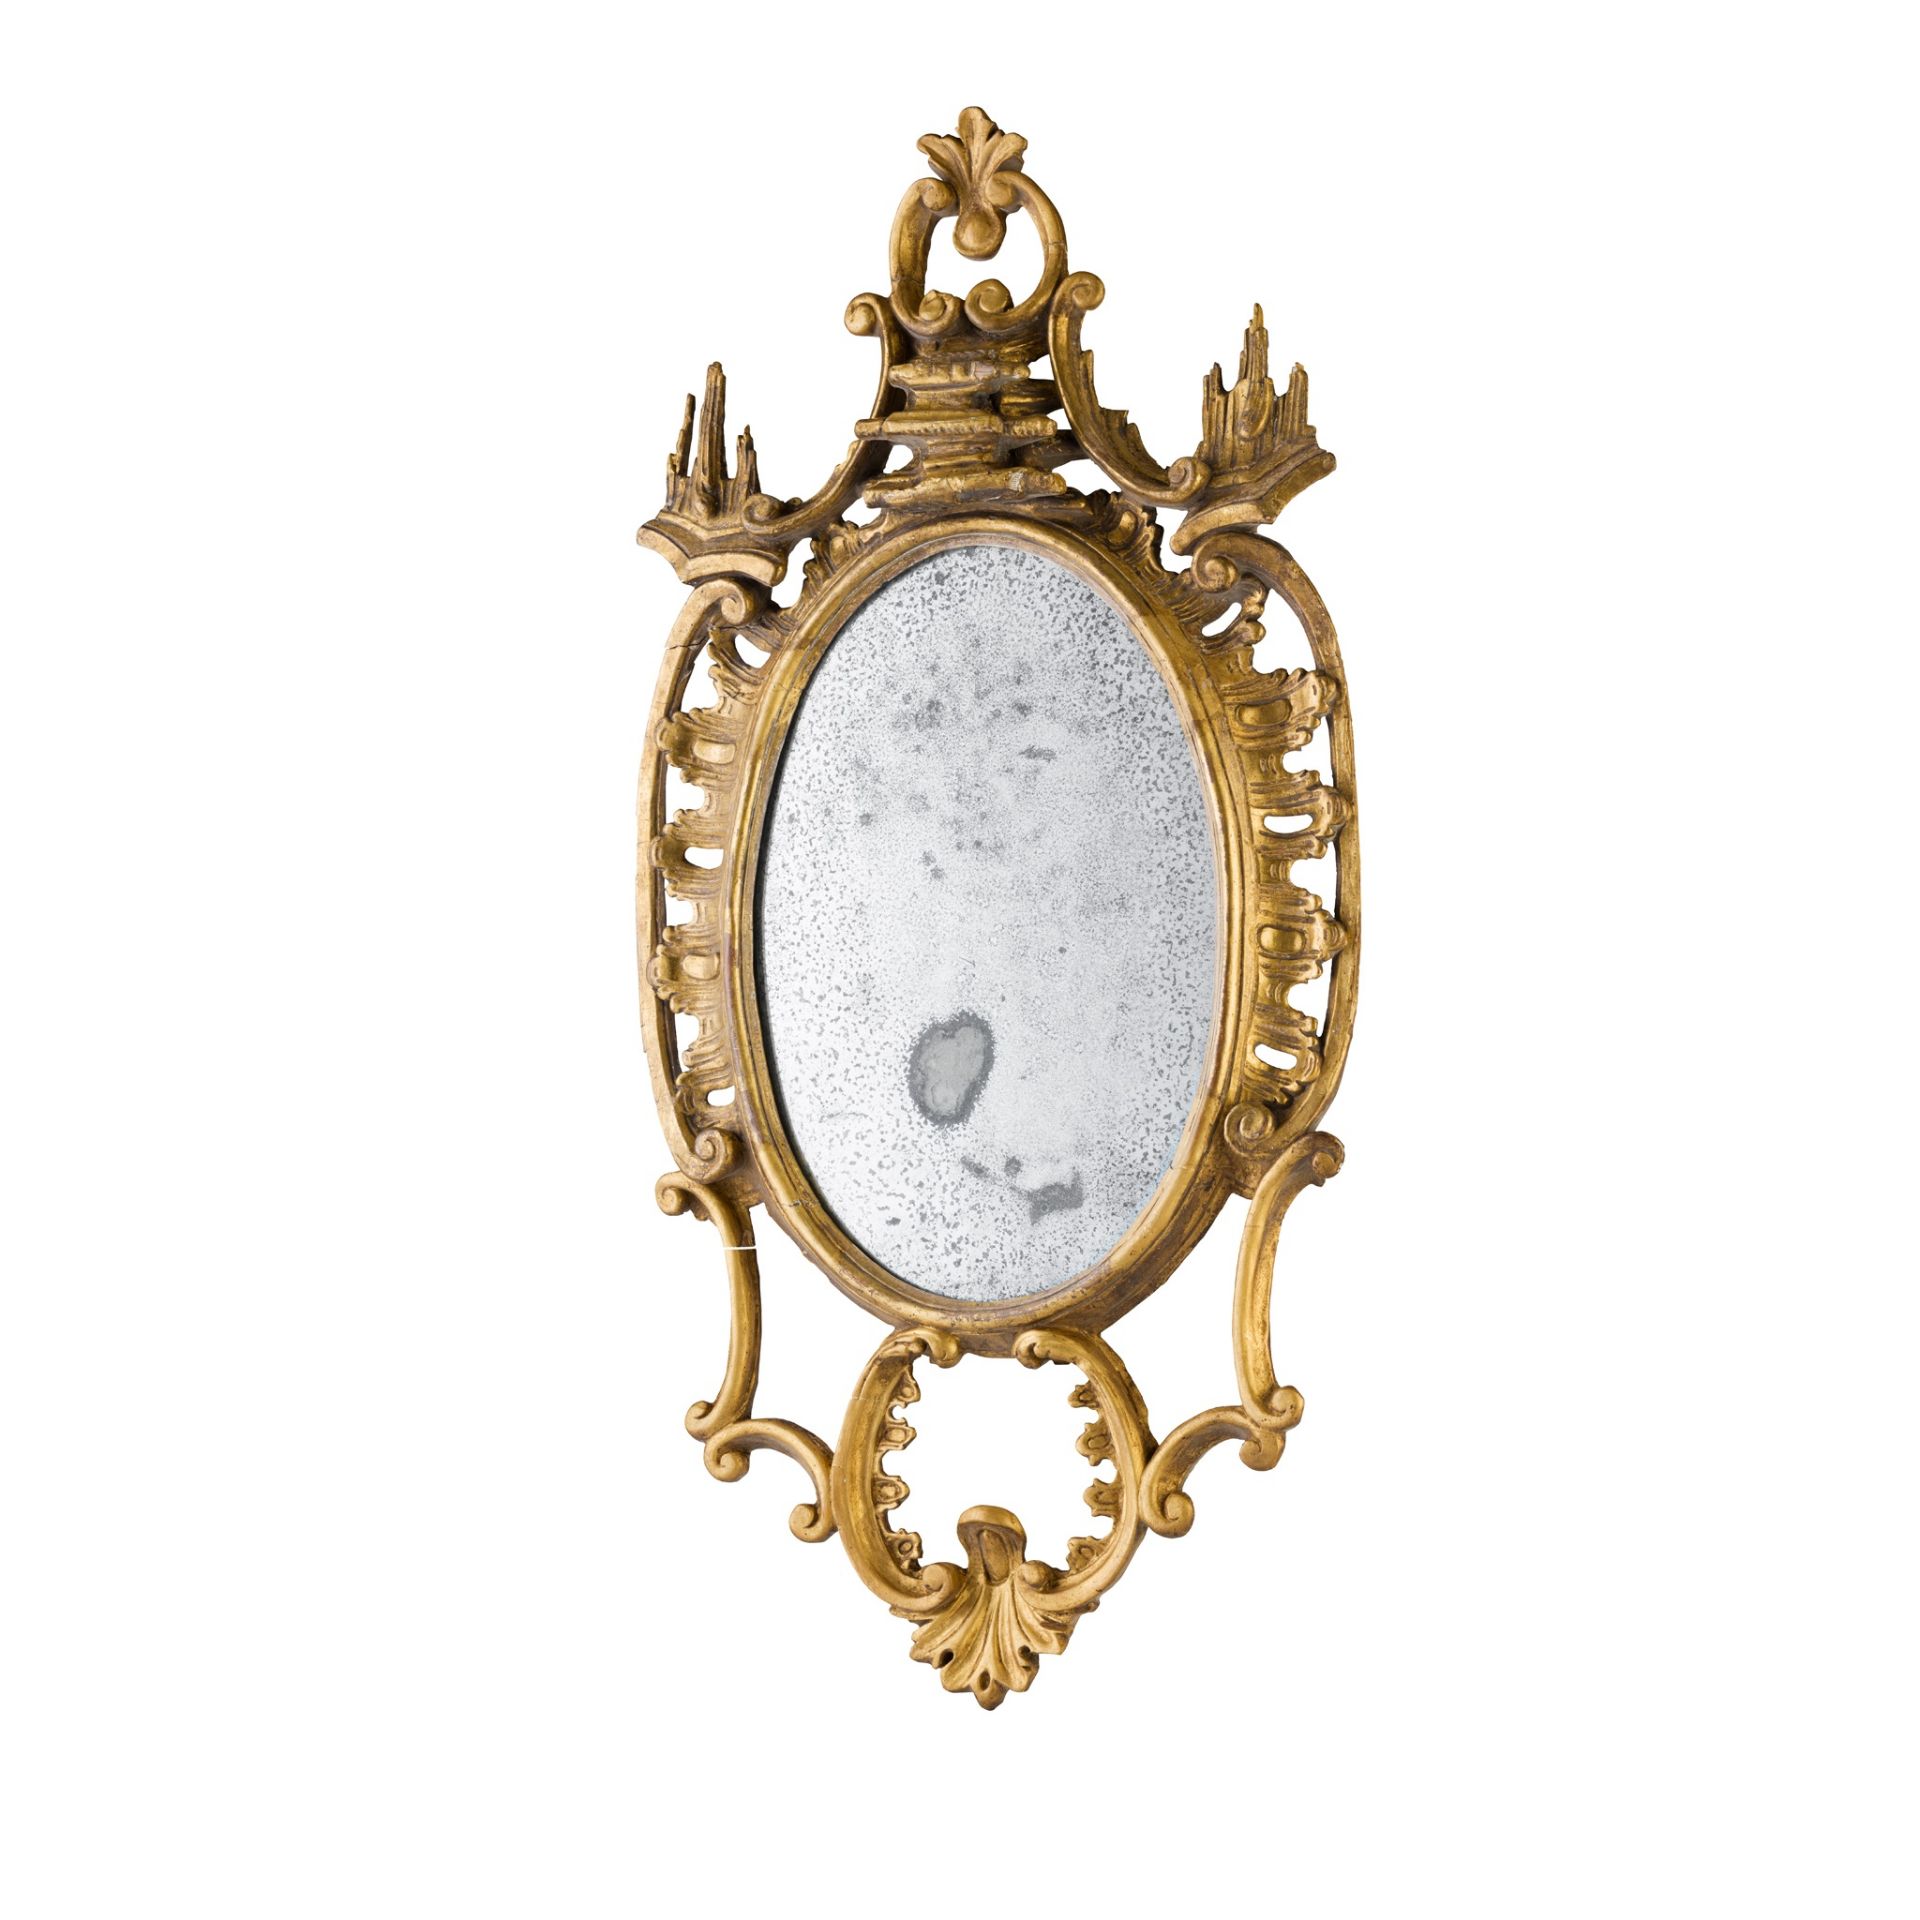 GEORGE III GILTWOOD MIRROR MID 18TH CENTURY, IN THE MANNER OF THOMAS JOHNSON